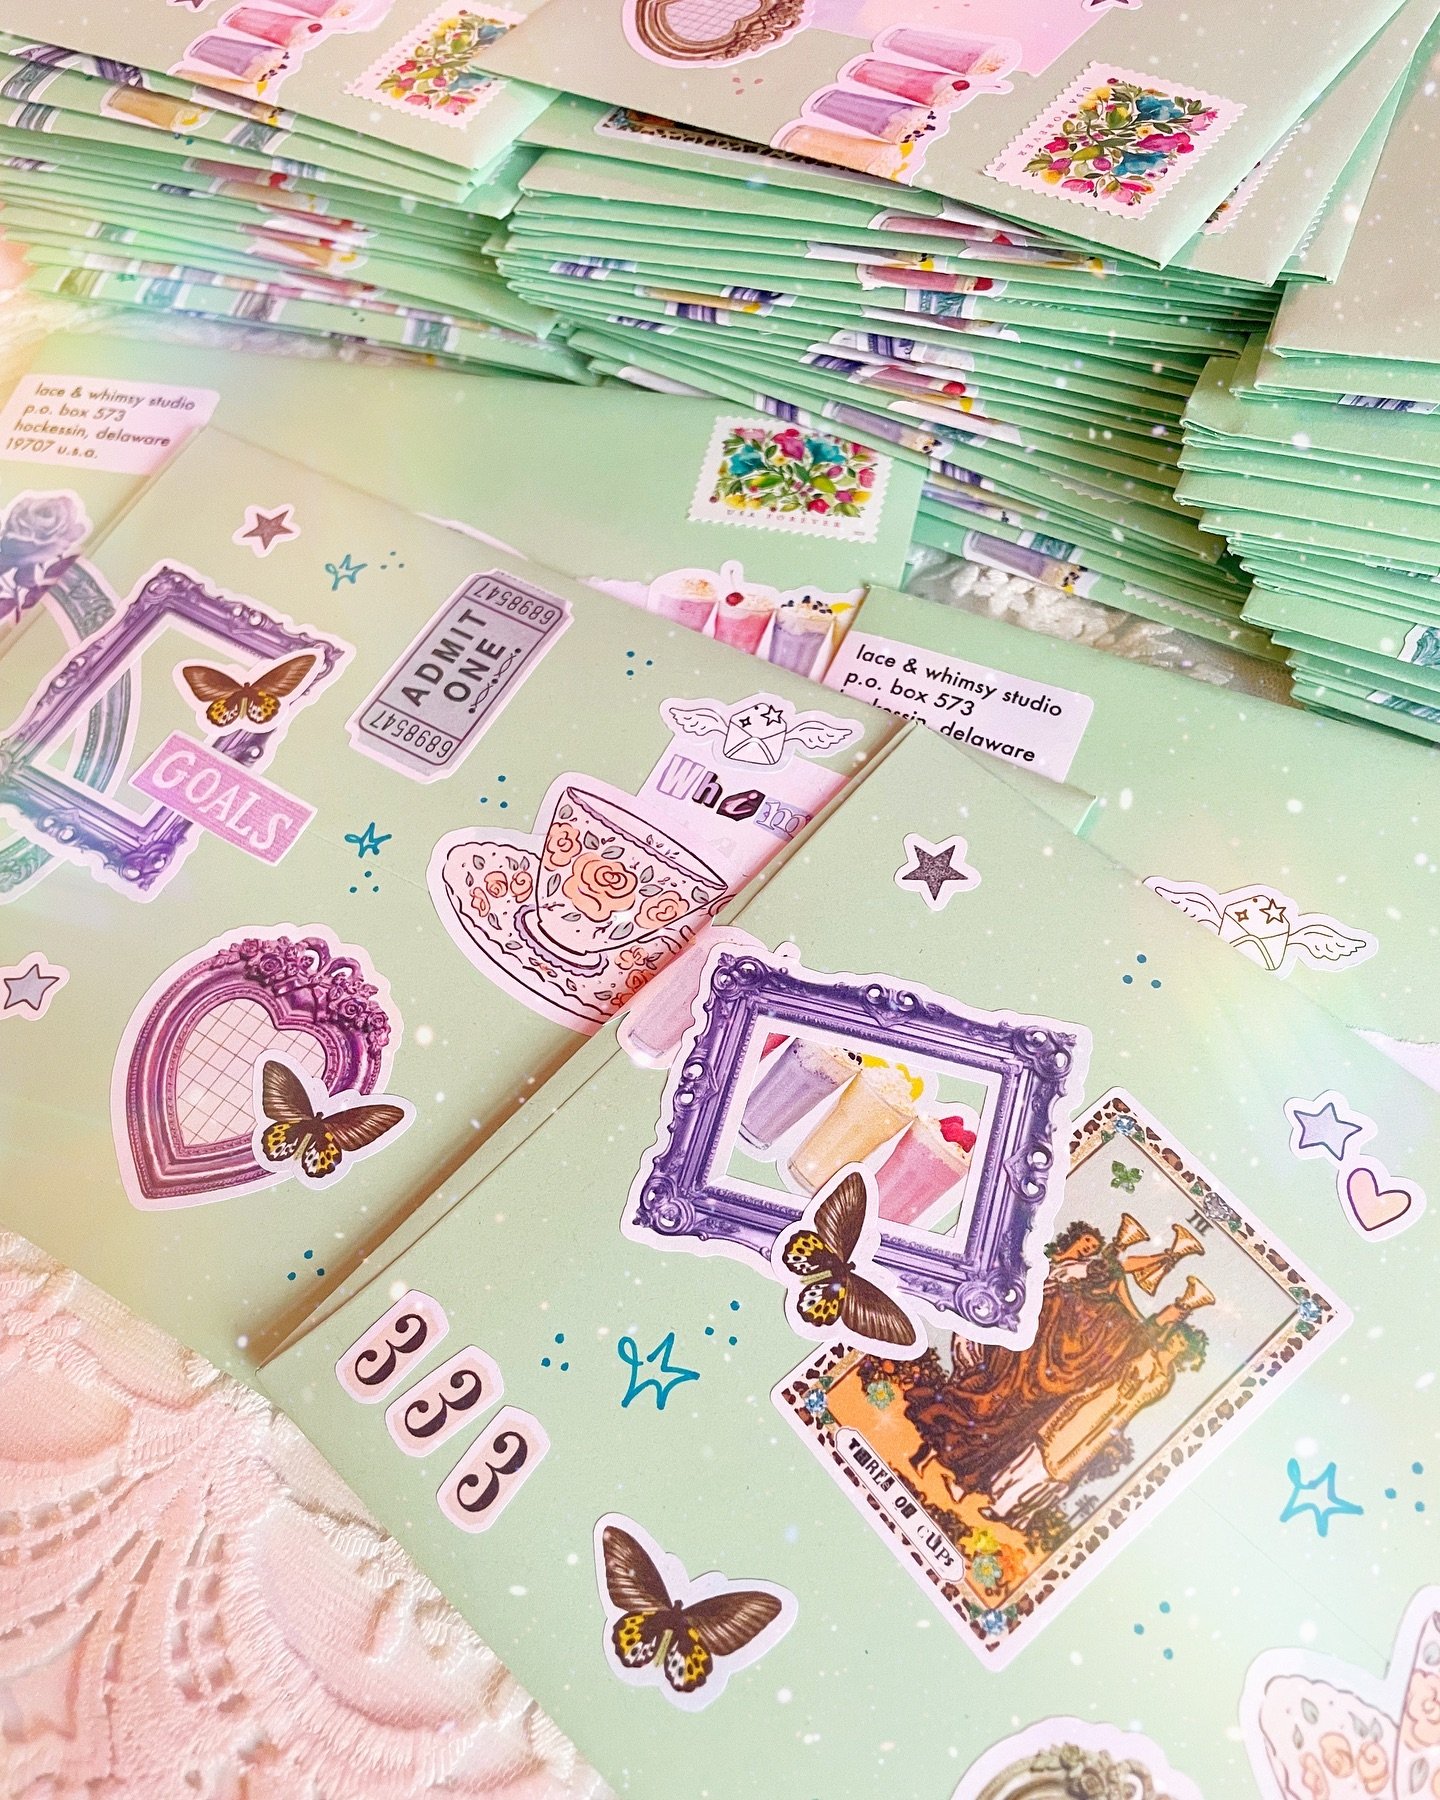 the first batch of April WhimsyMail sticker subscriptions just shipped out. if you haven&rsquo;t been charged yet for April, your WhimsyMail will ship Monday, April 29th after I&rsquo;m back from my trip. (I&rsquo;m visiting family in France, yay!) ?